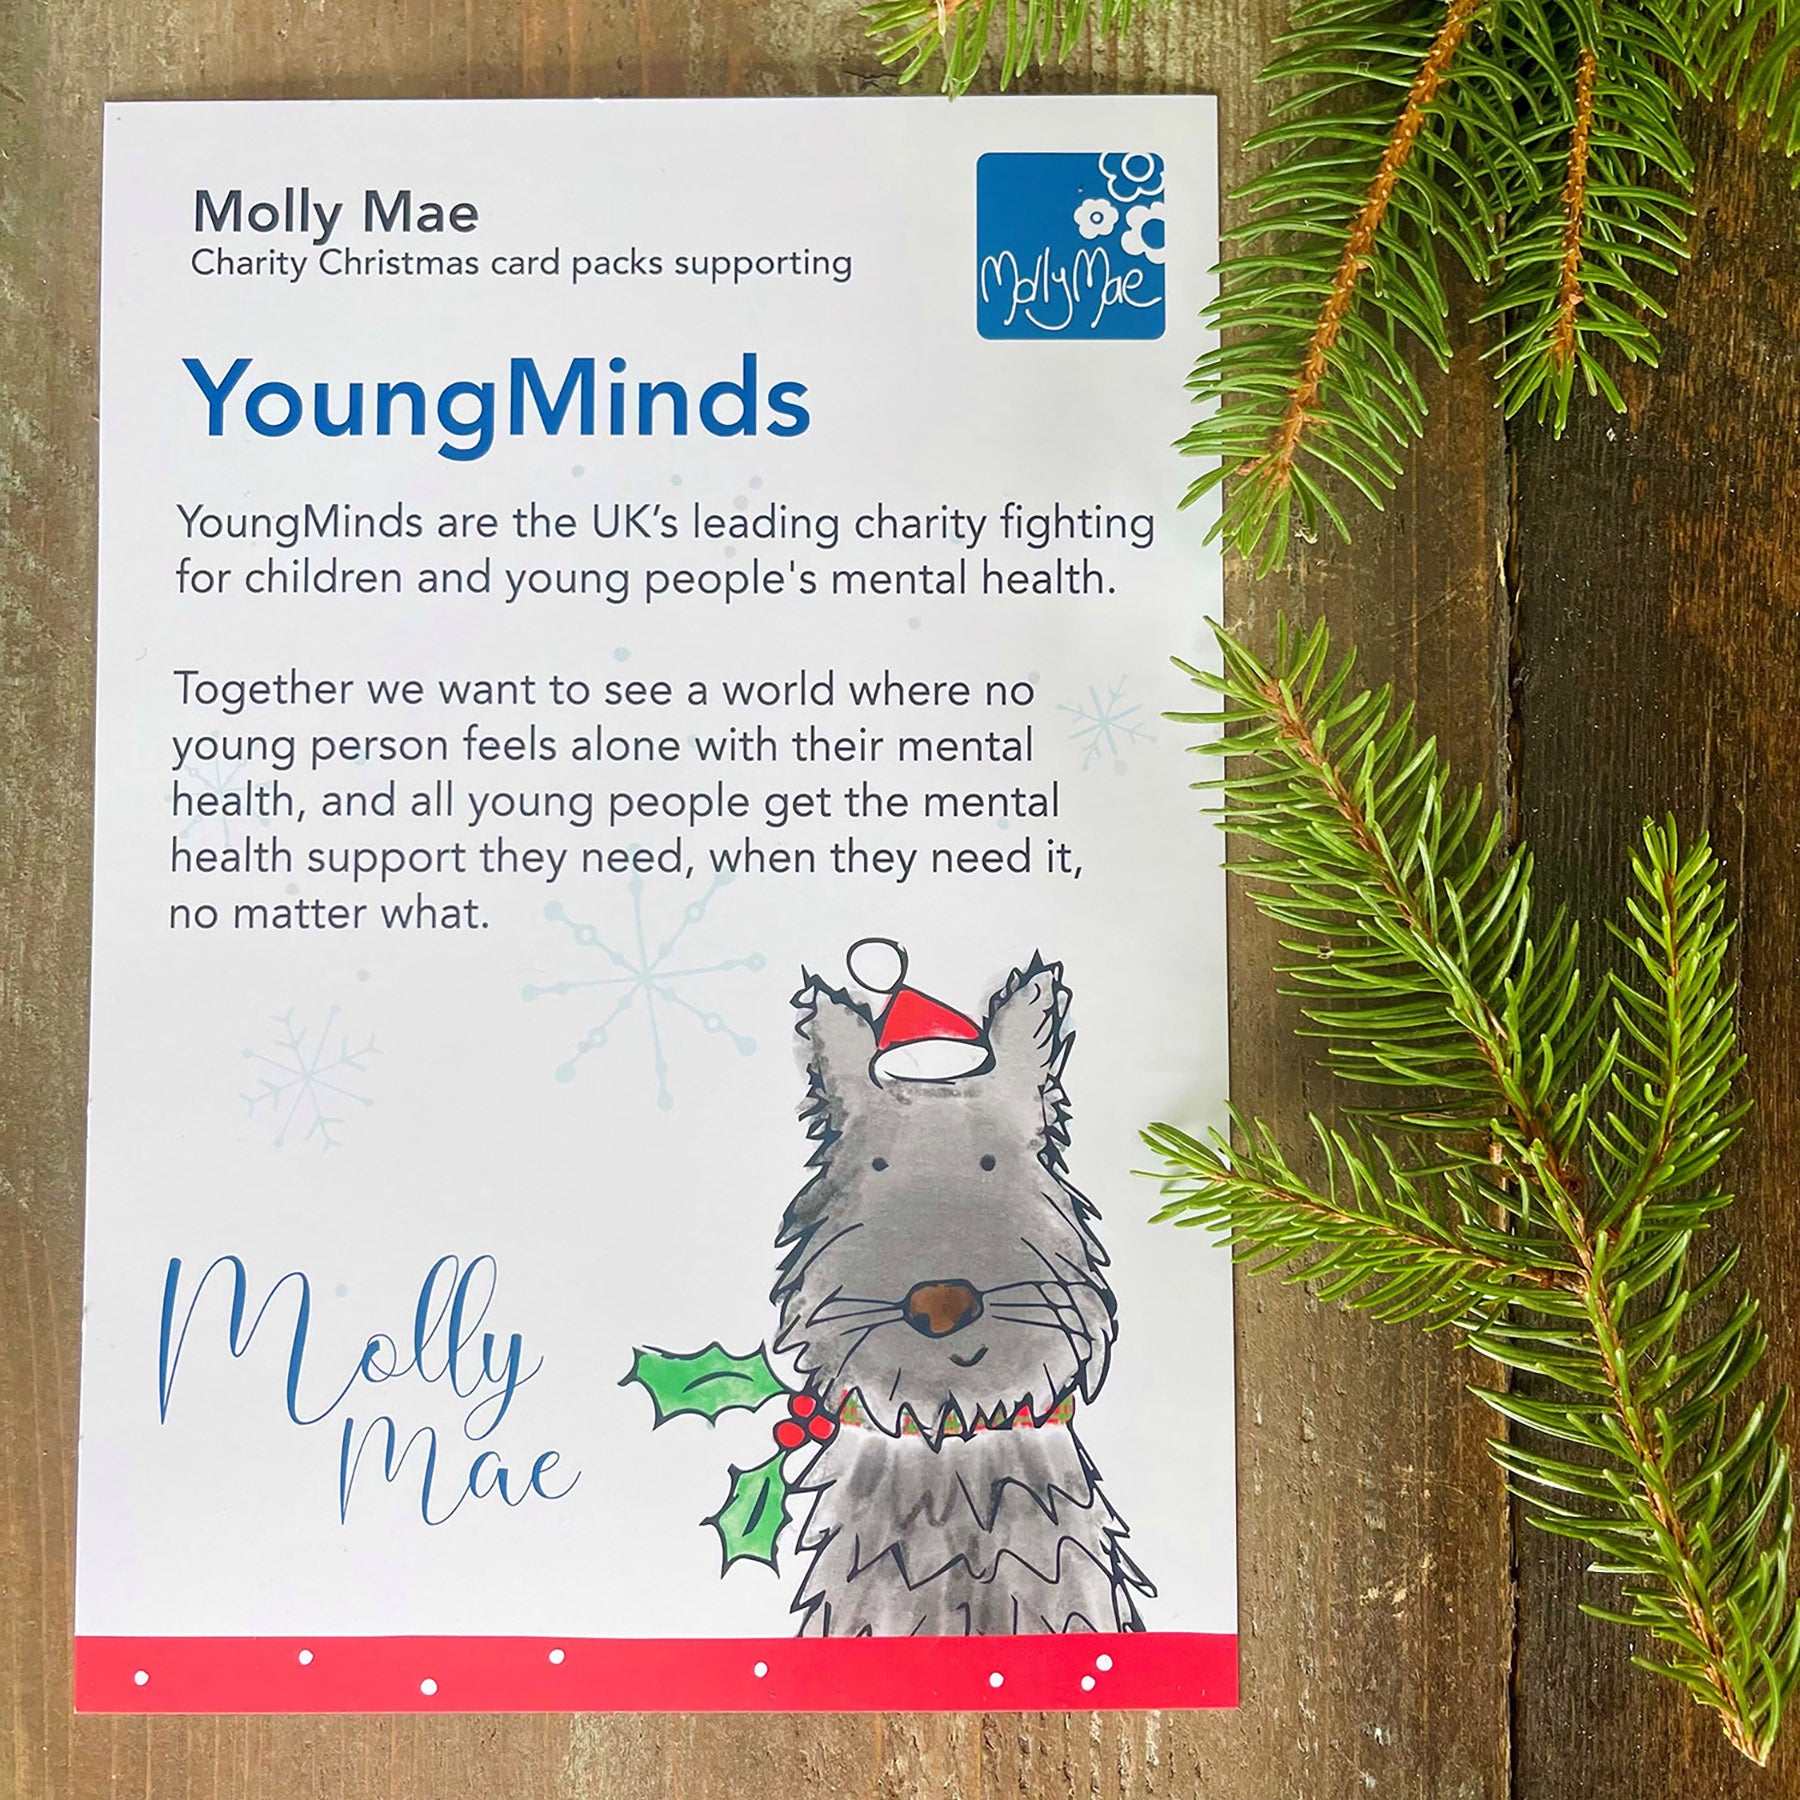 Molly Mae are proud to support Youngs Minds charity